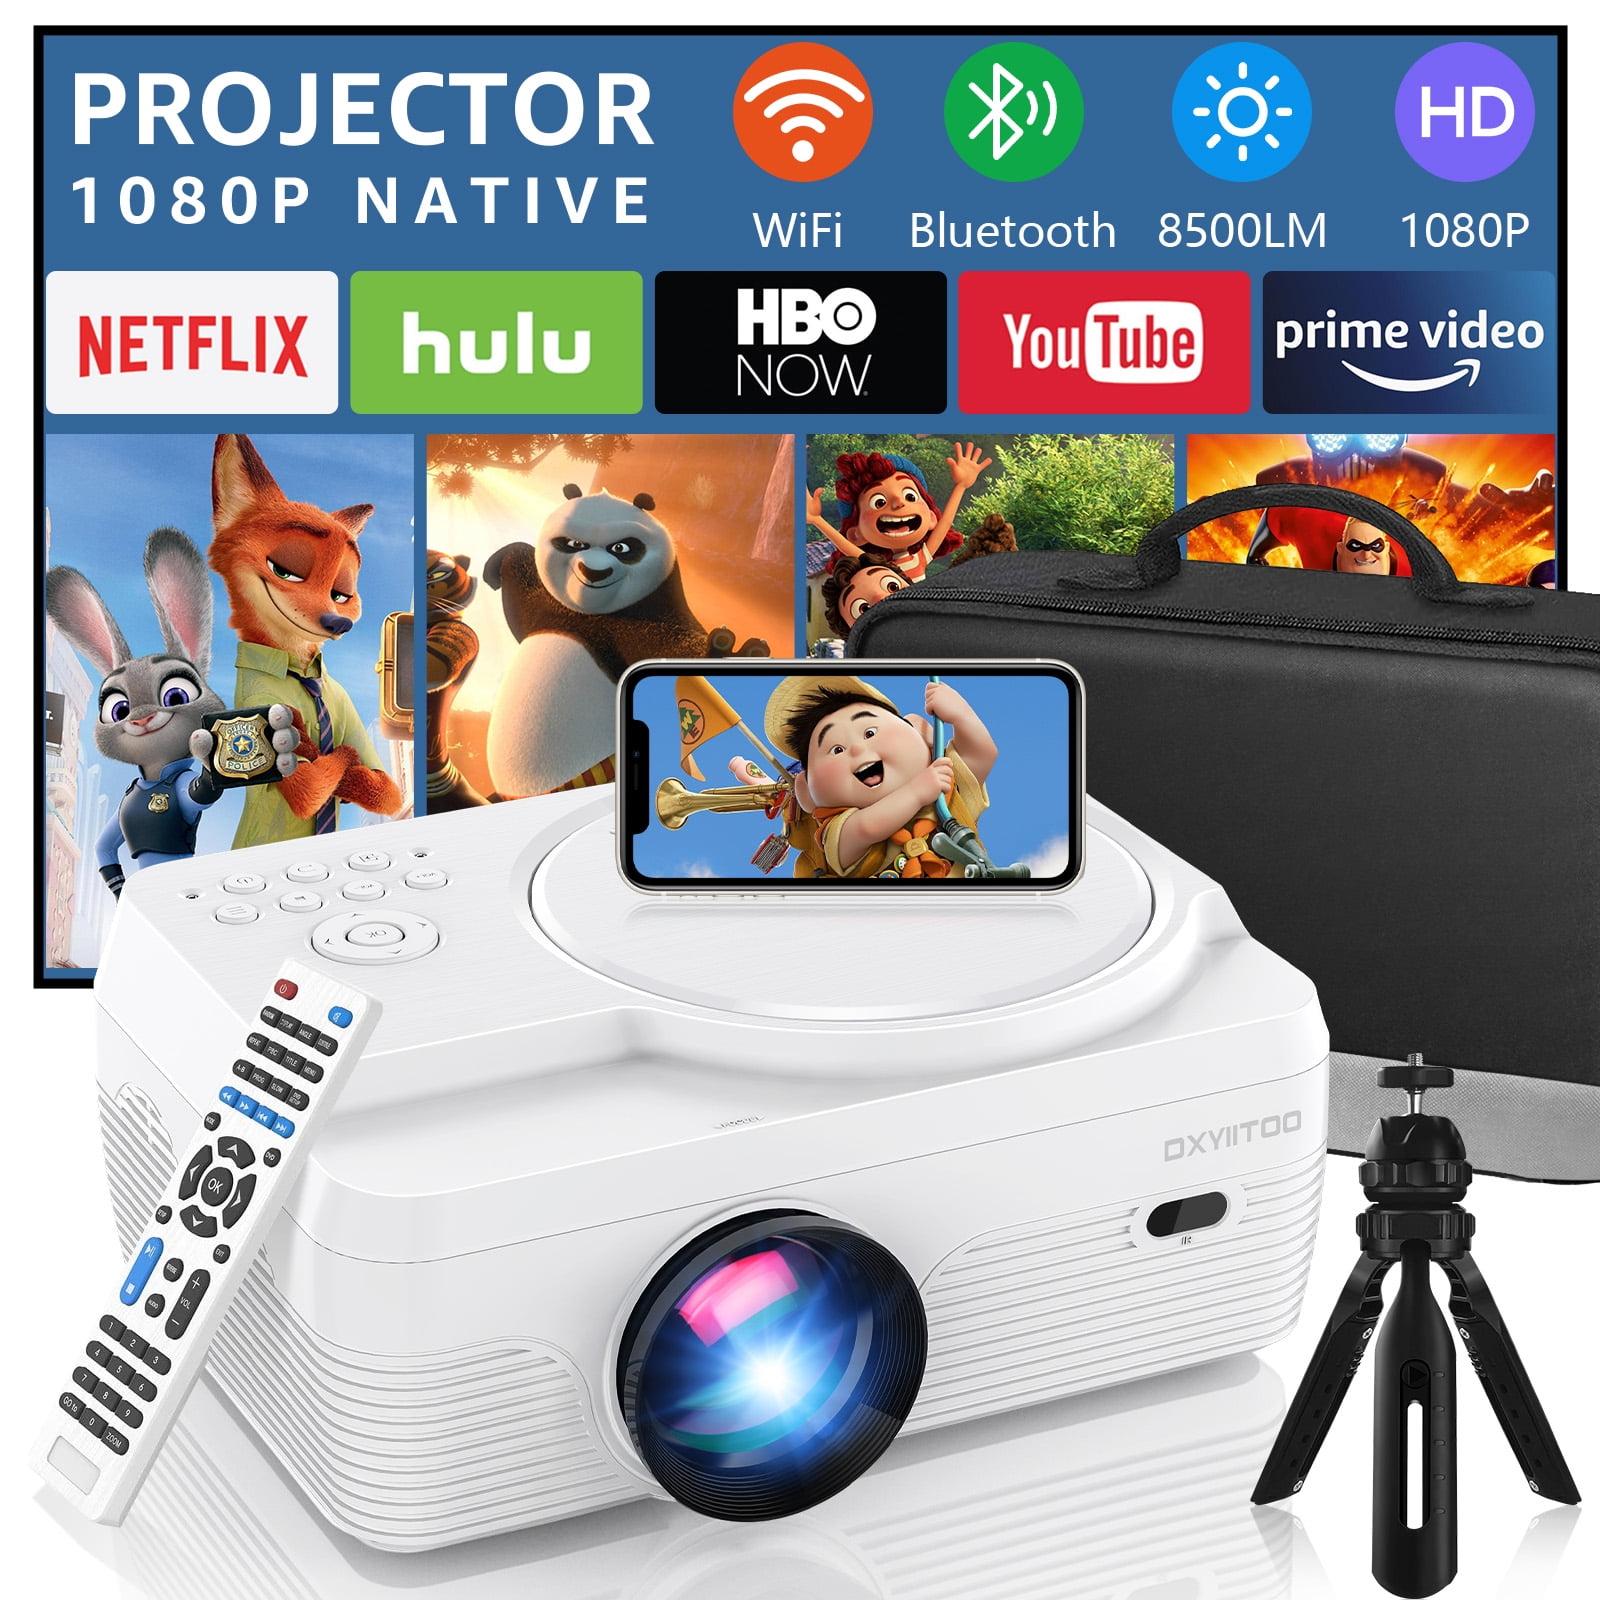 Wimius Full HD 8500 Lm Proyector –